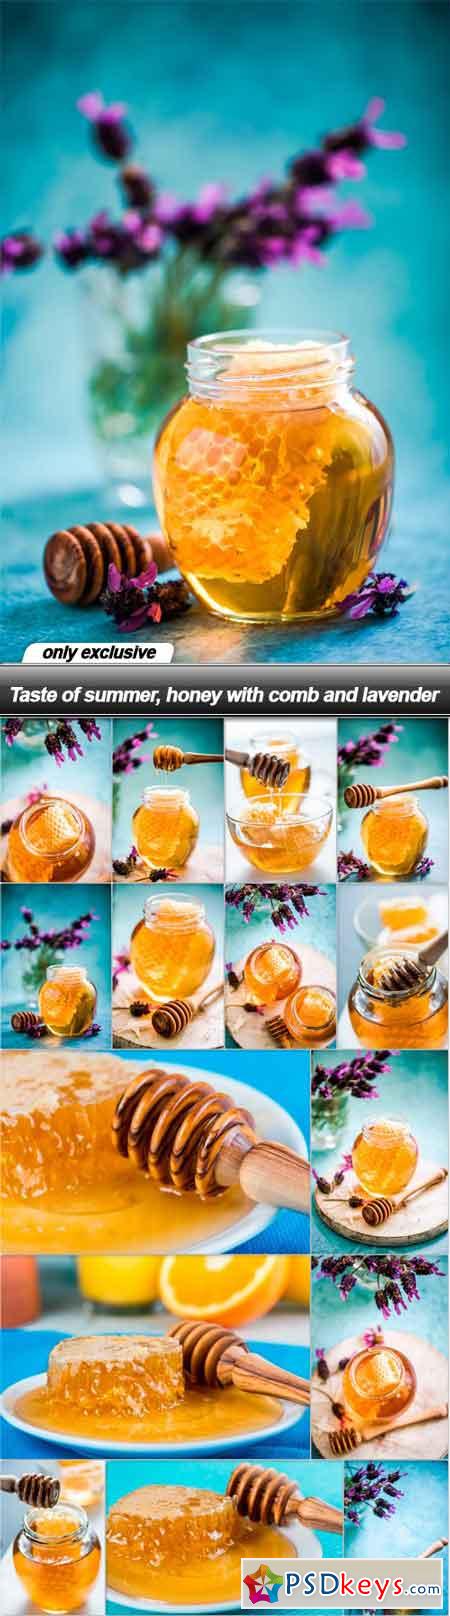 Taste of summer, honey with comb and lavender - 15 UHQ JPEG